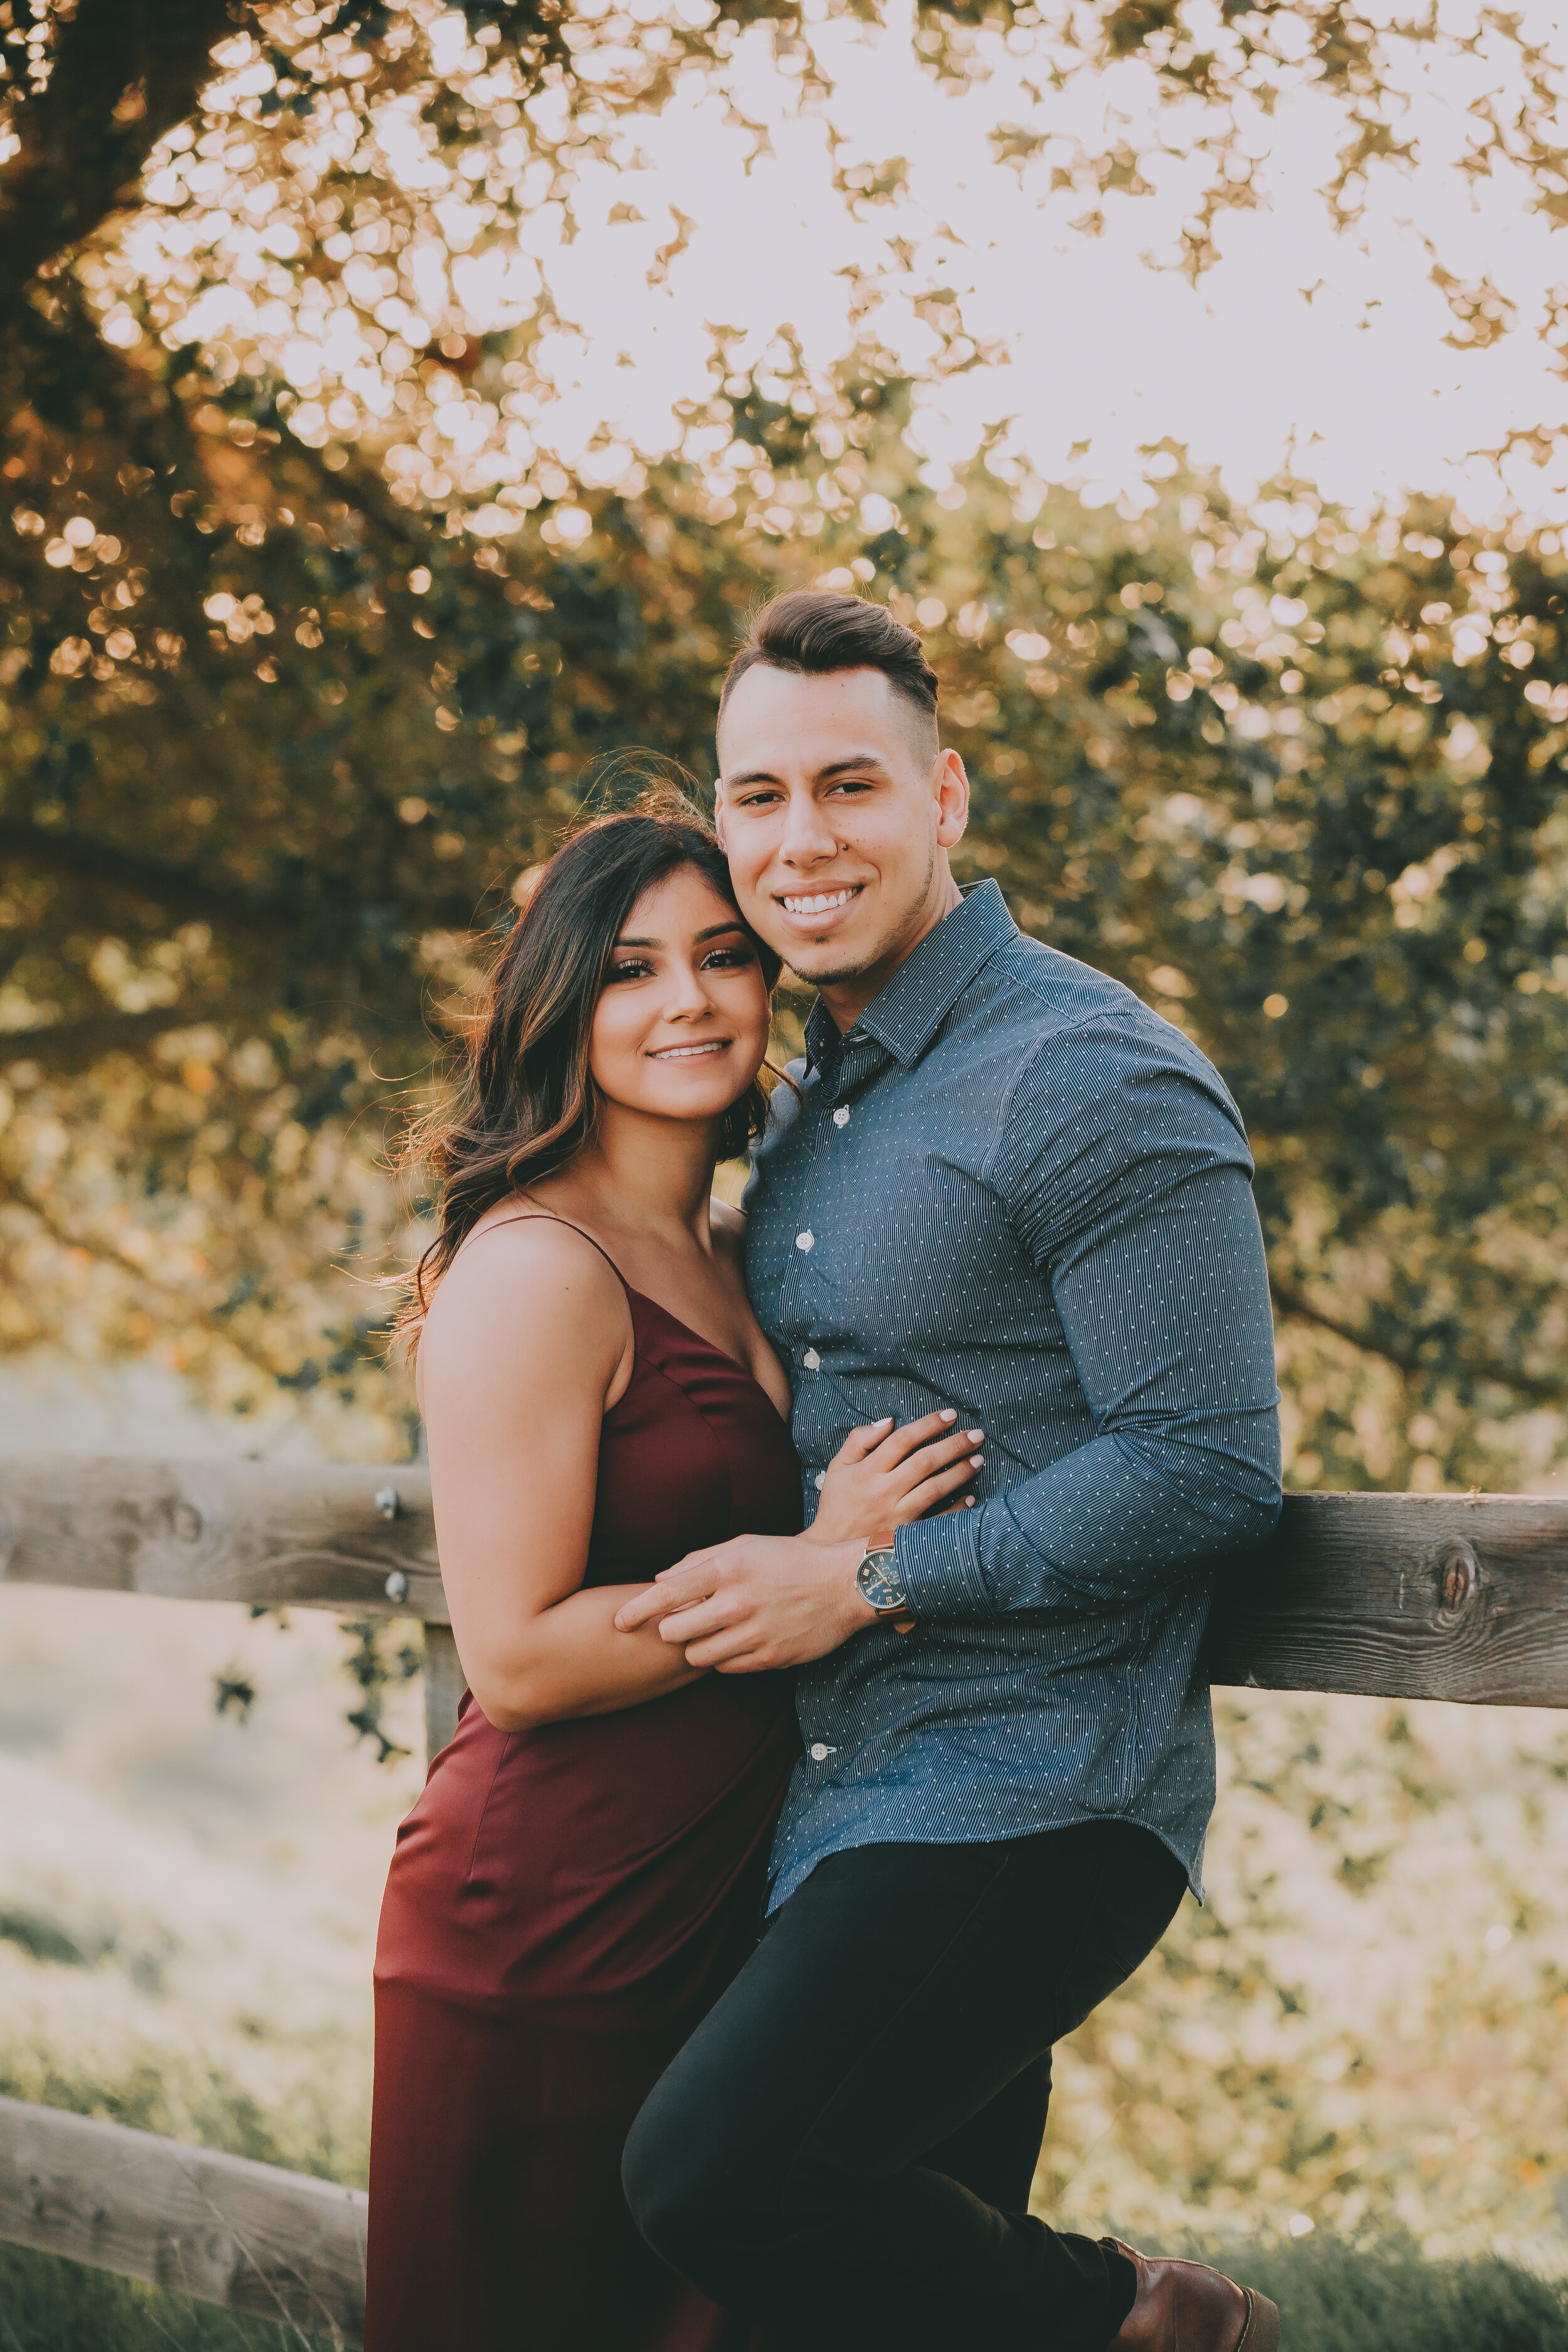 Fresno Engagament Photos - The Clausen Gallery - Samantha and Jesus-16.jpg